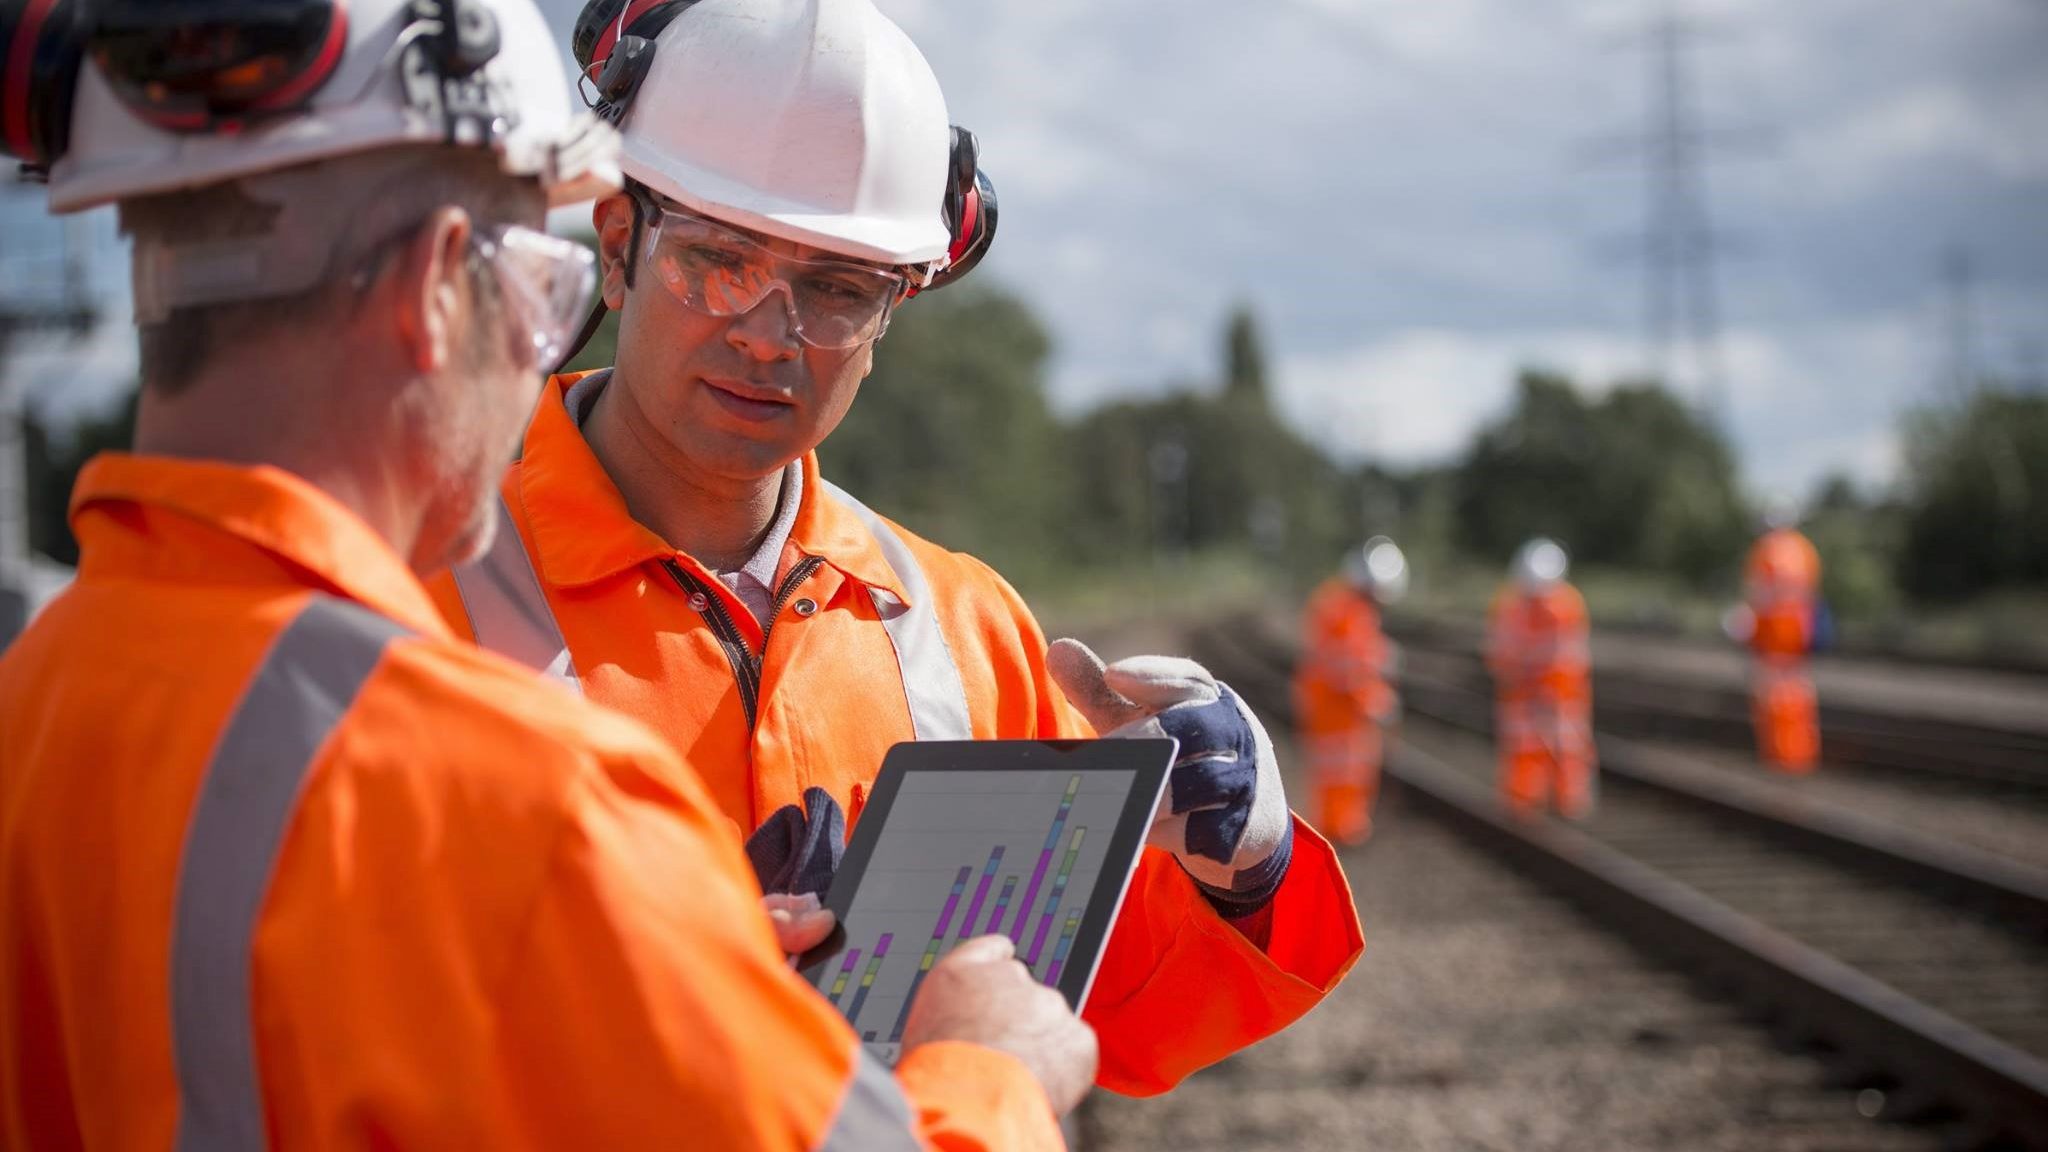 Railway people rail jobs search results